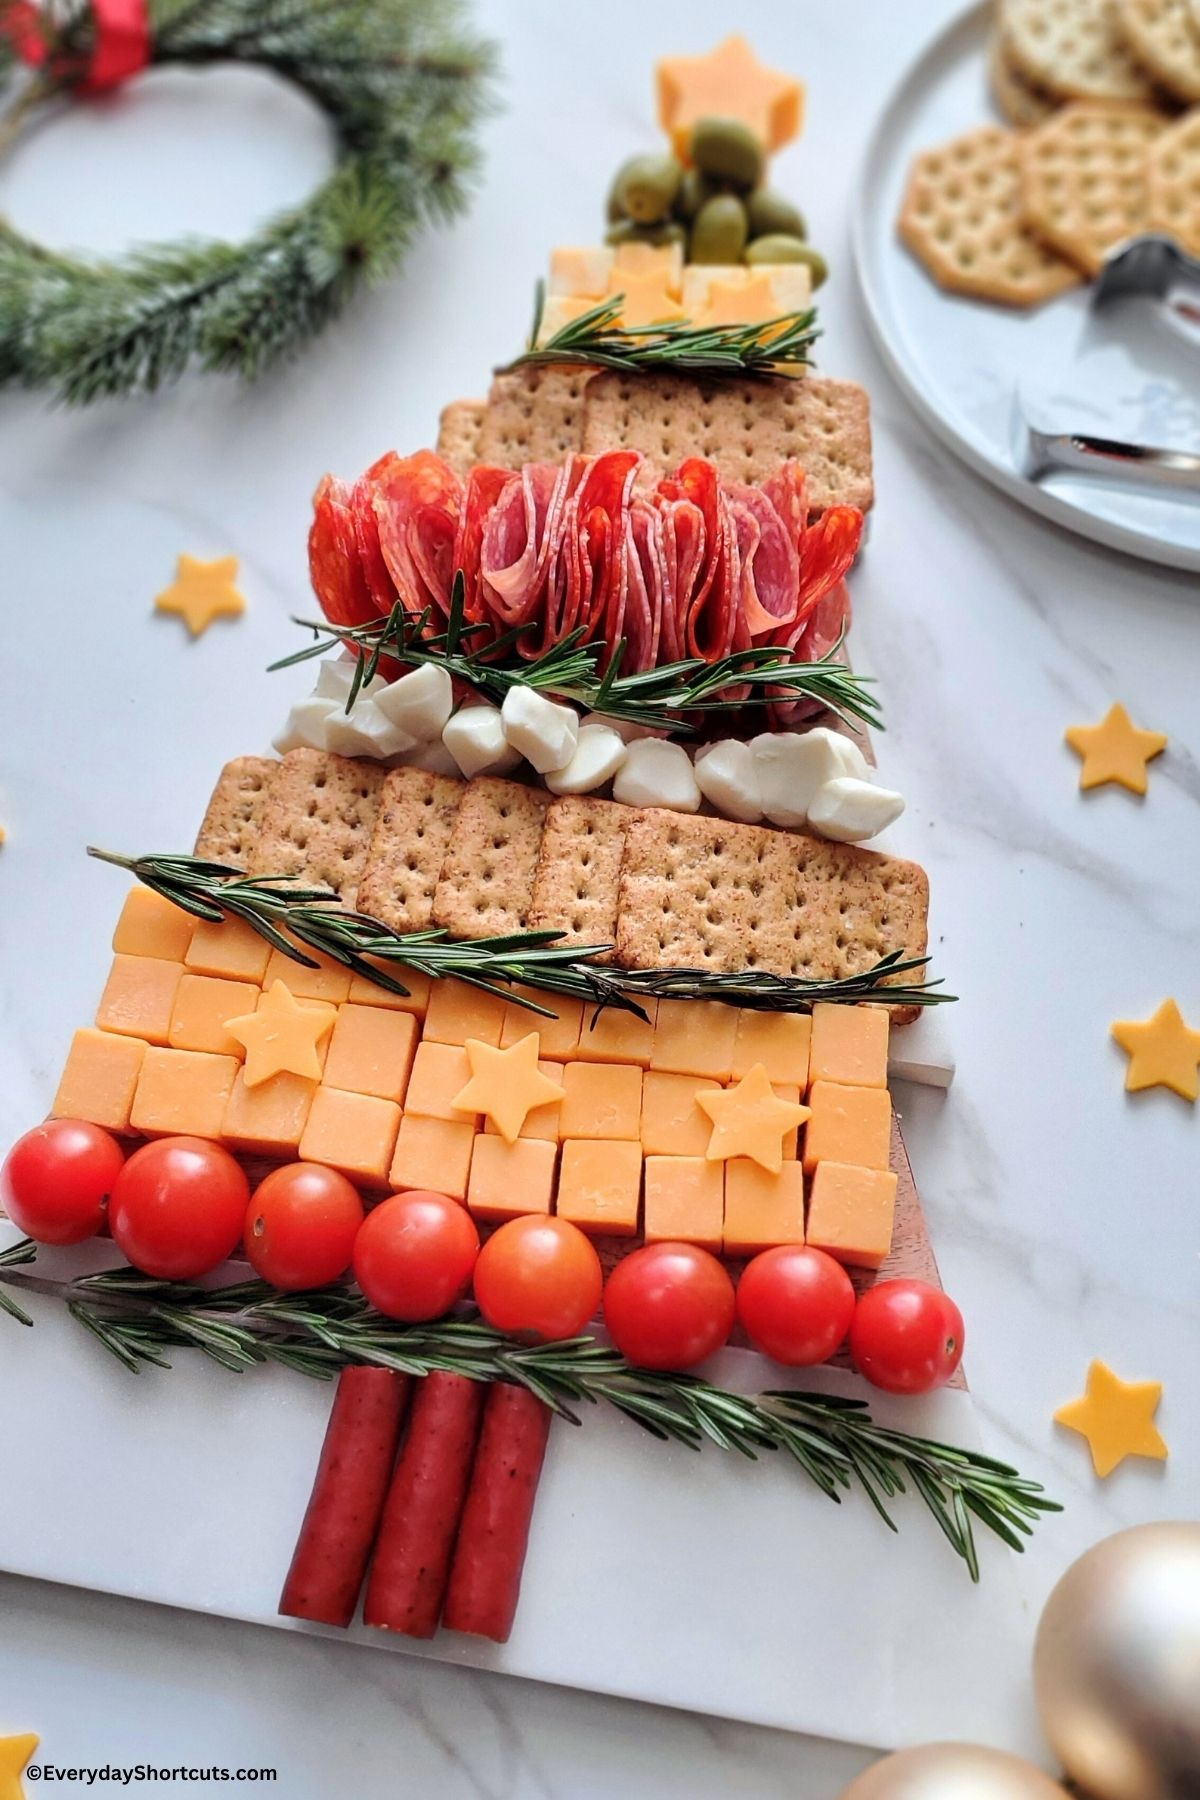 Christmas tree themed charcuterie board with meats and cheeses